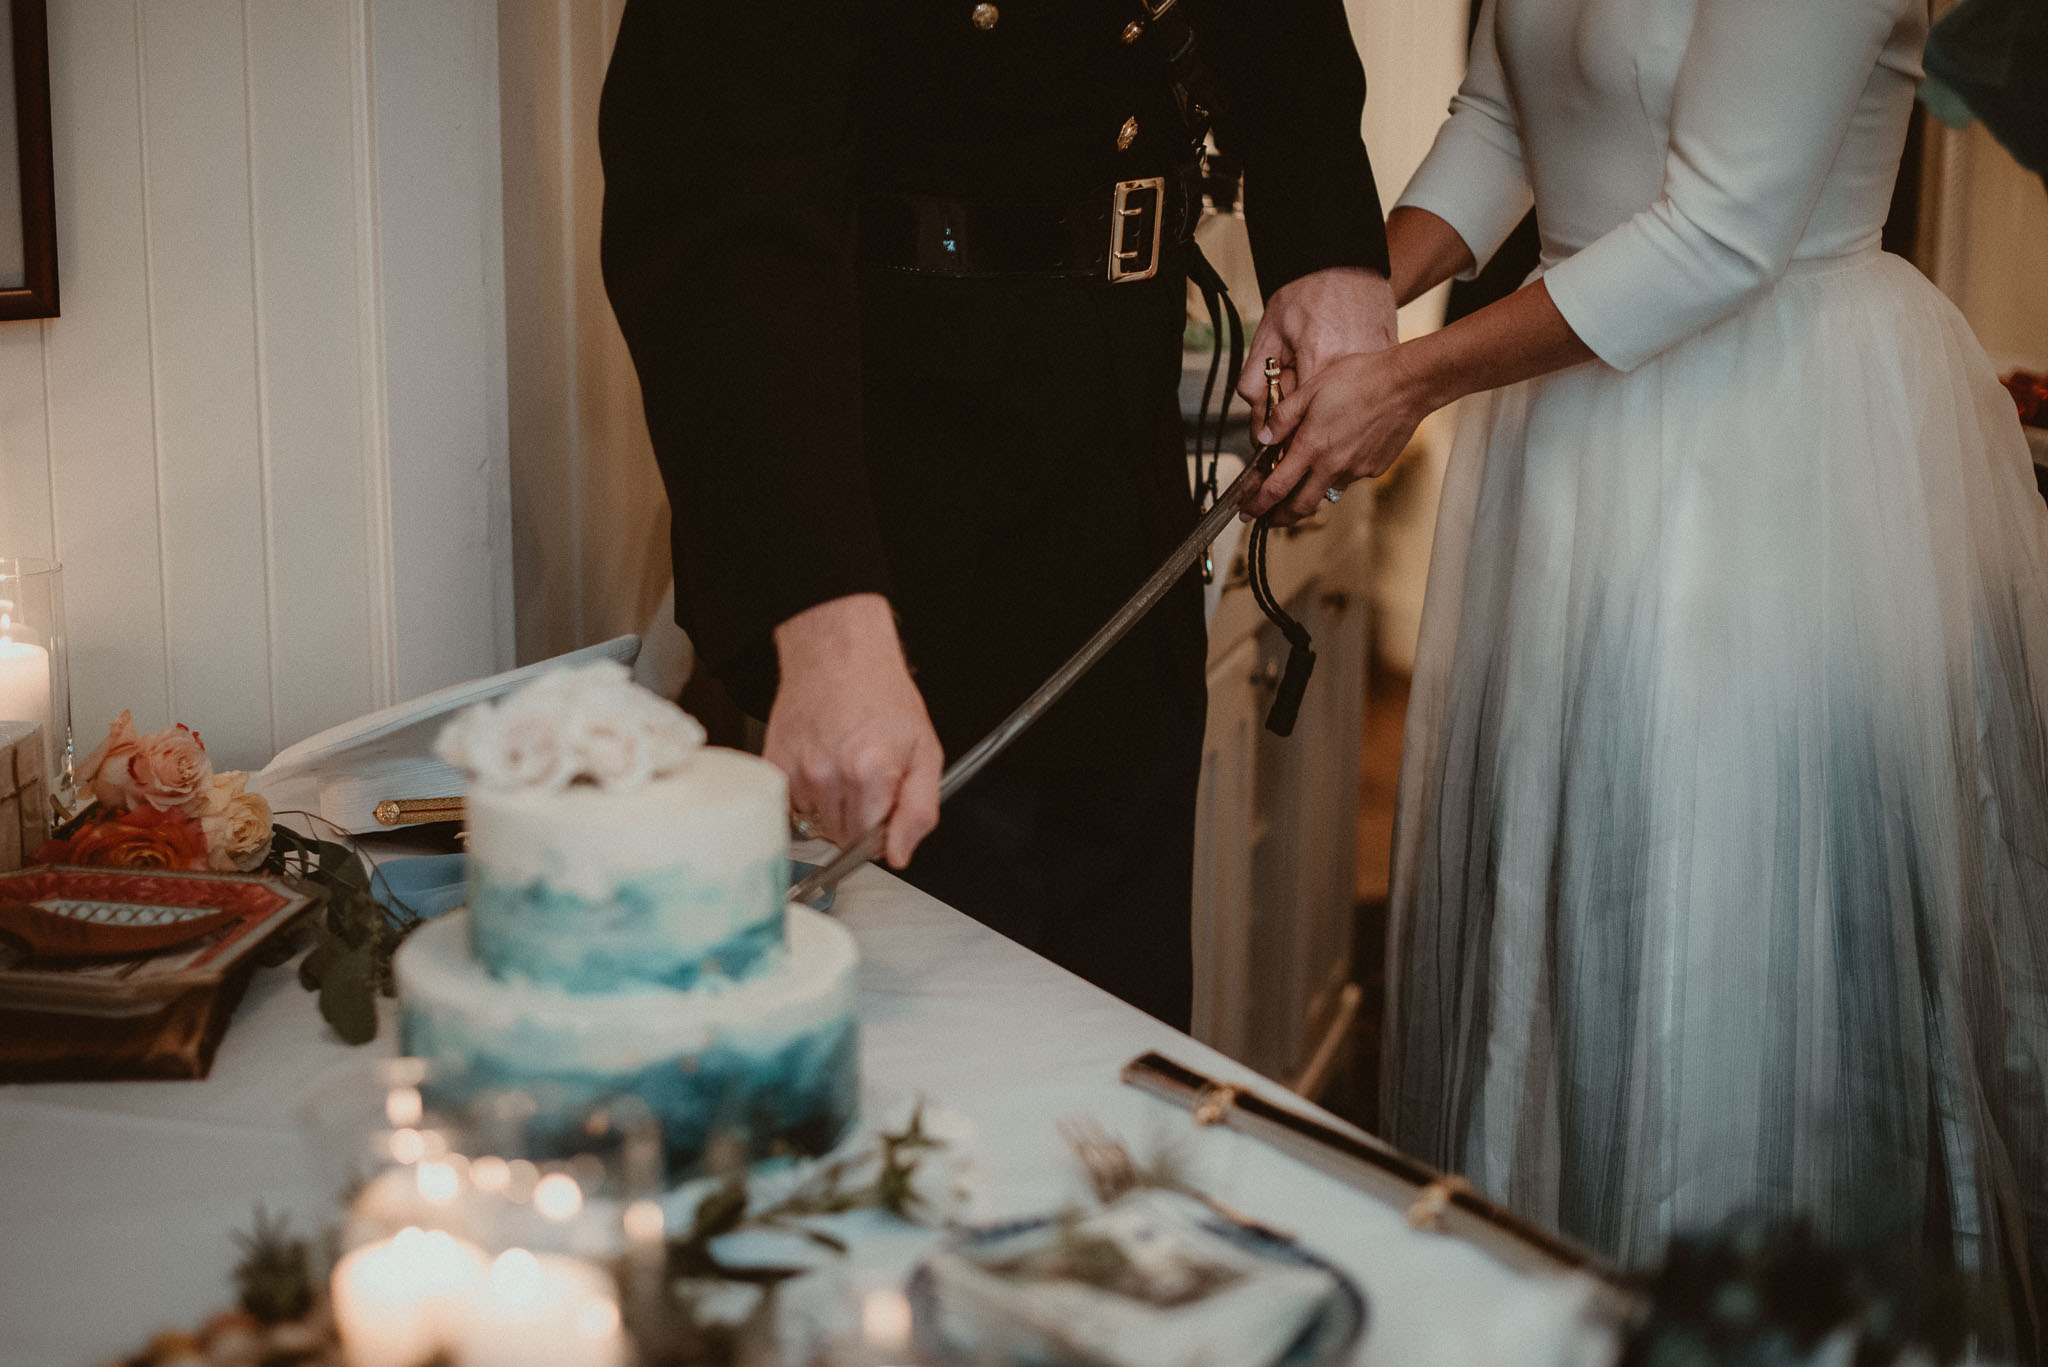 The couple cutting the wedding cake with the grooms sword.